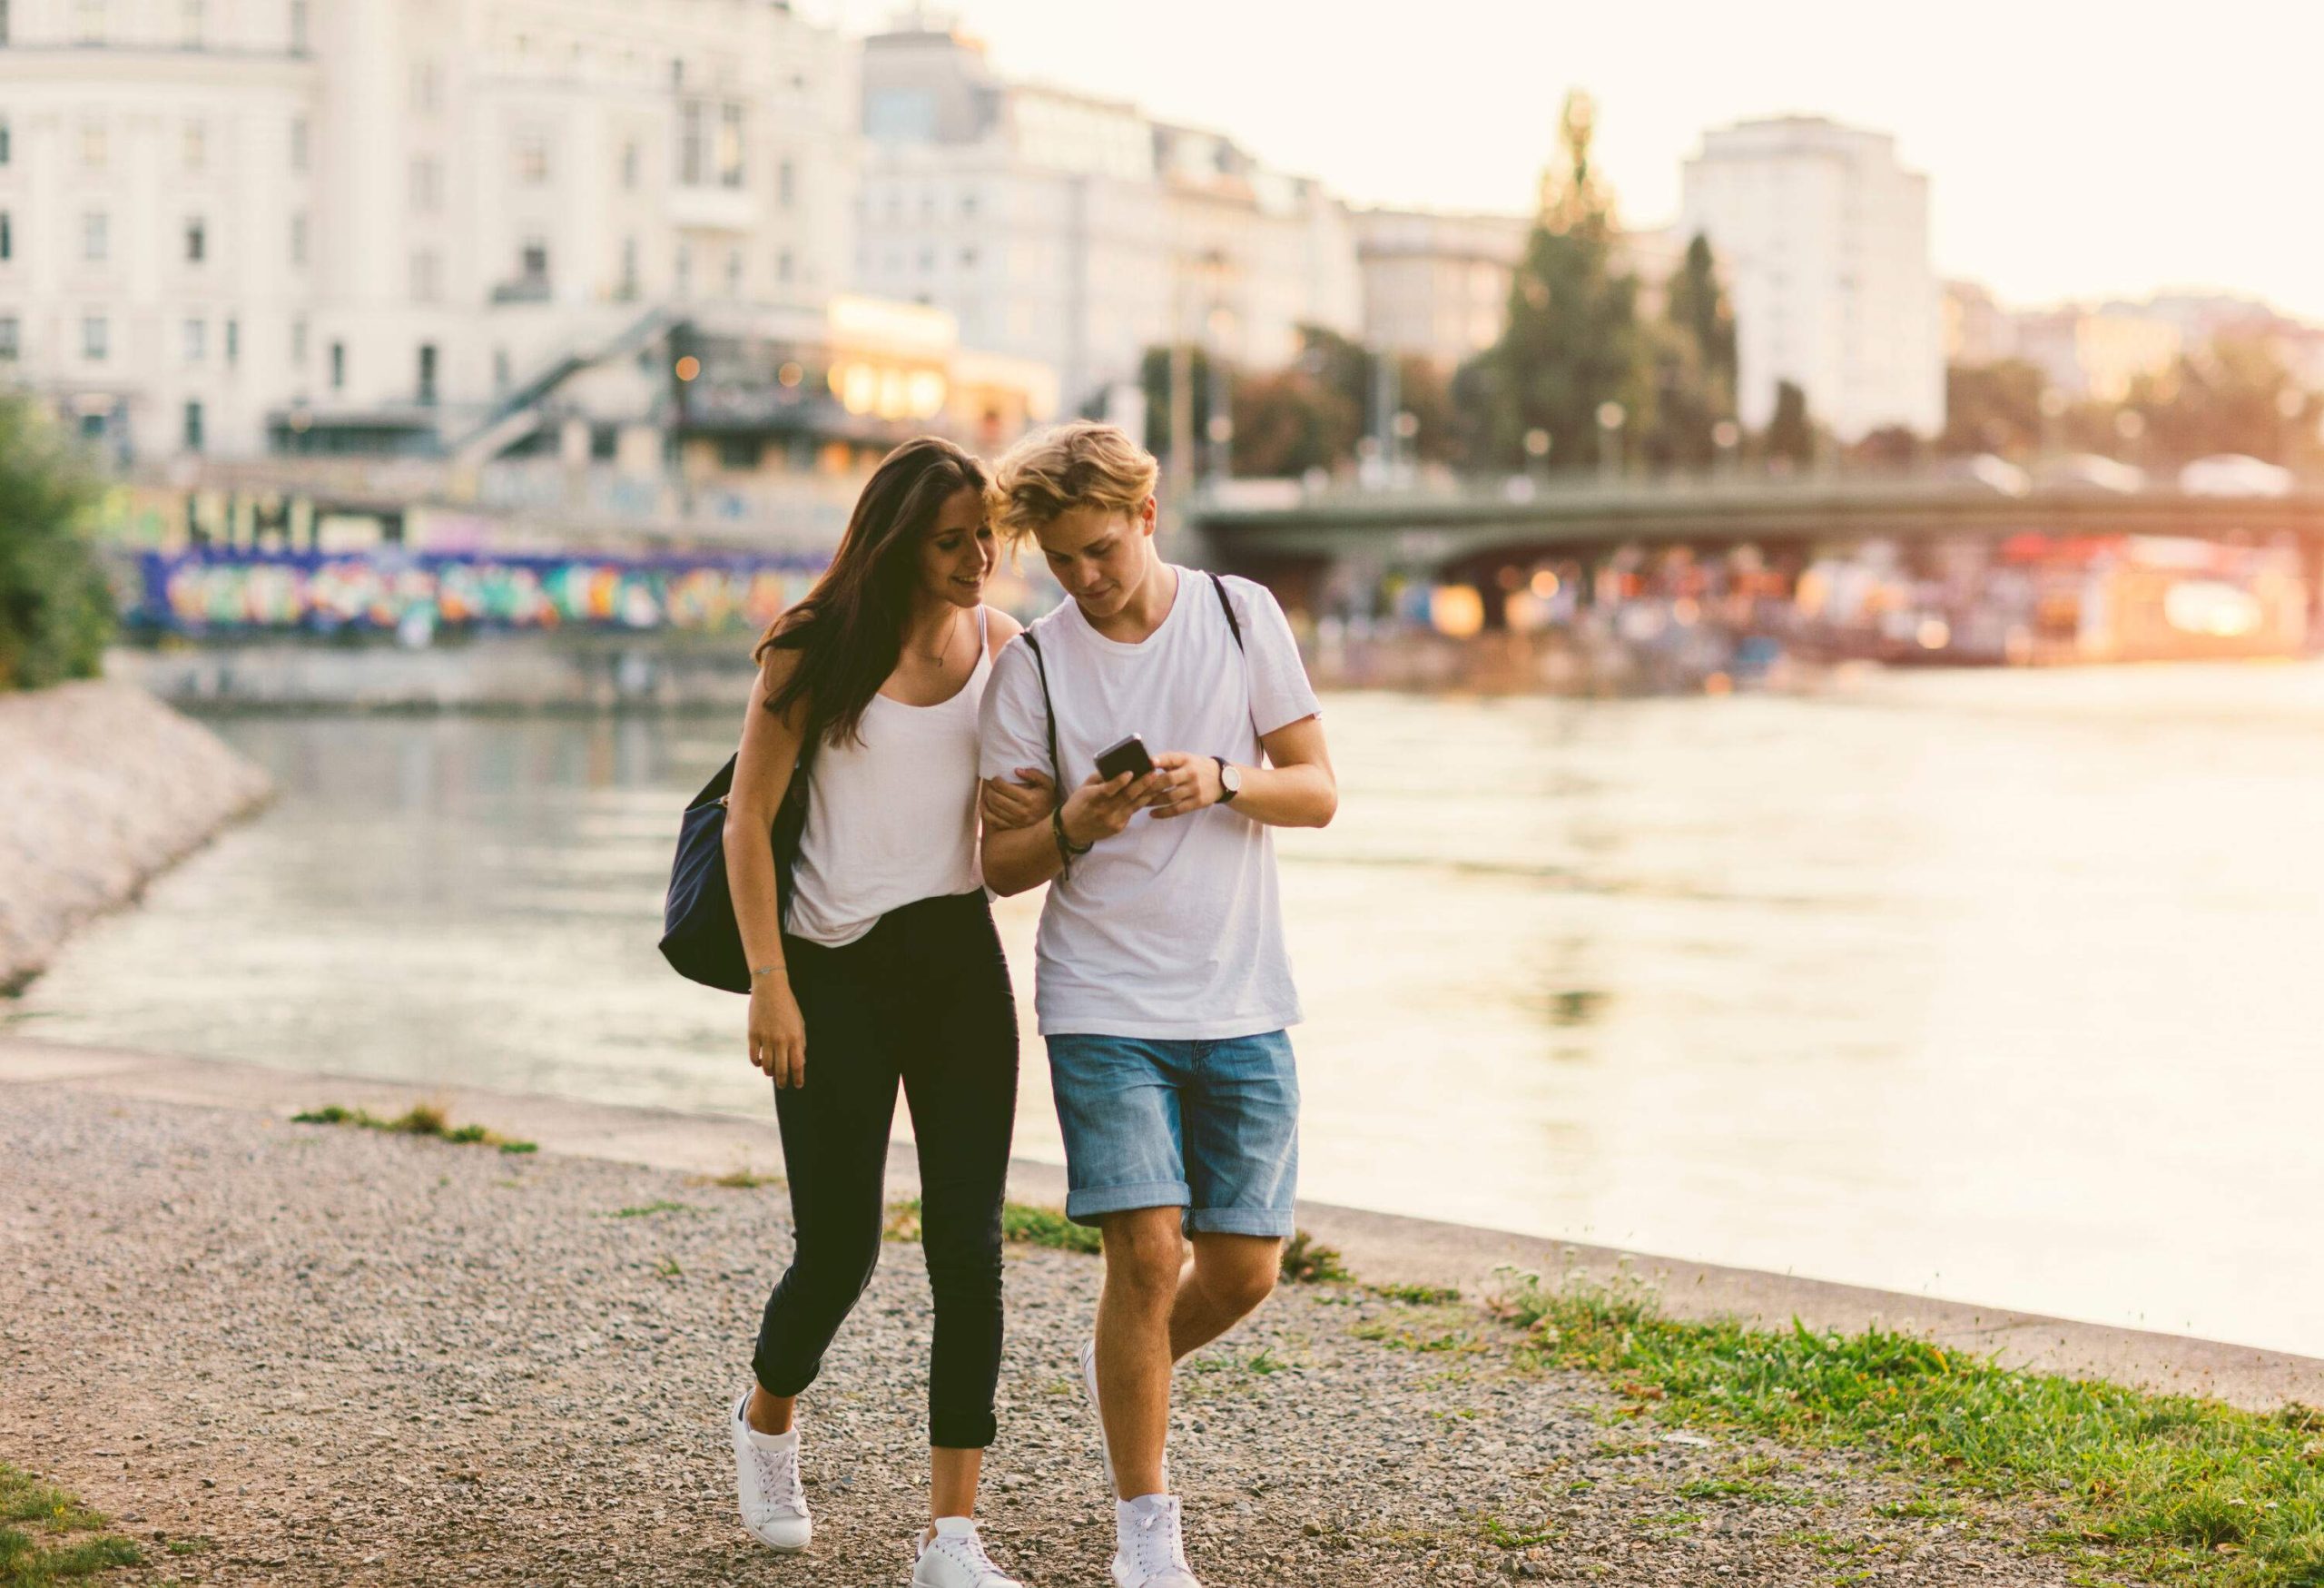 A teenage couple strolls leisurely by the Danube River, the boy holding a smartphone and sharing its content with his companion, both smiling and dressed in casual attire.